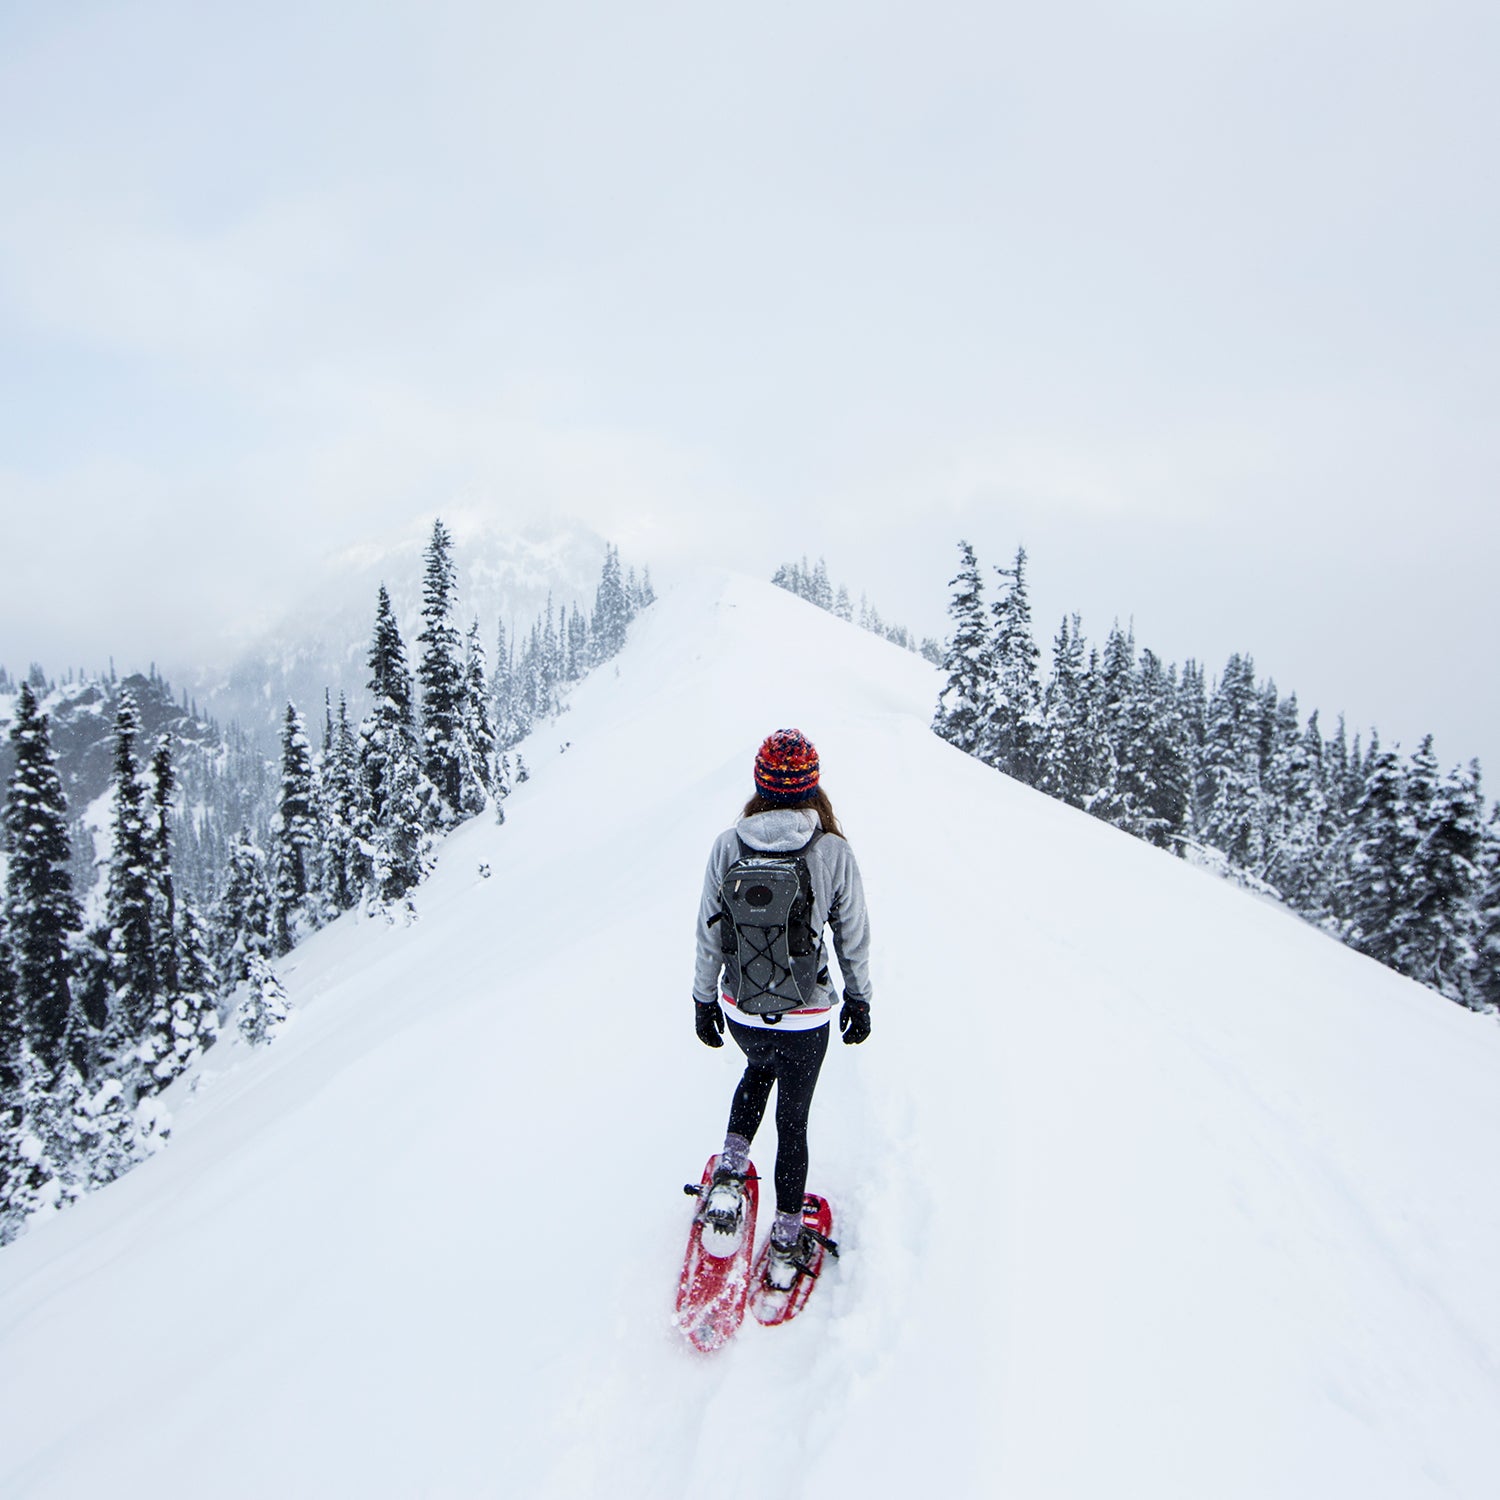 Winter Camping Checklist: What To Bring • Snowshoe Mag